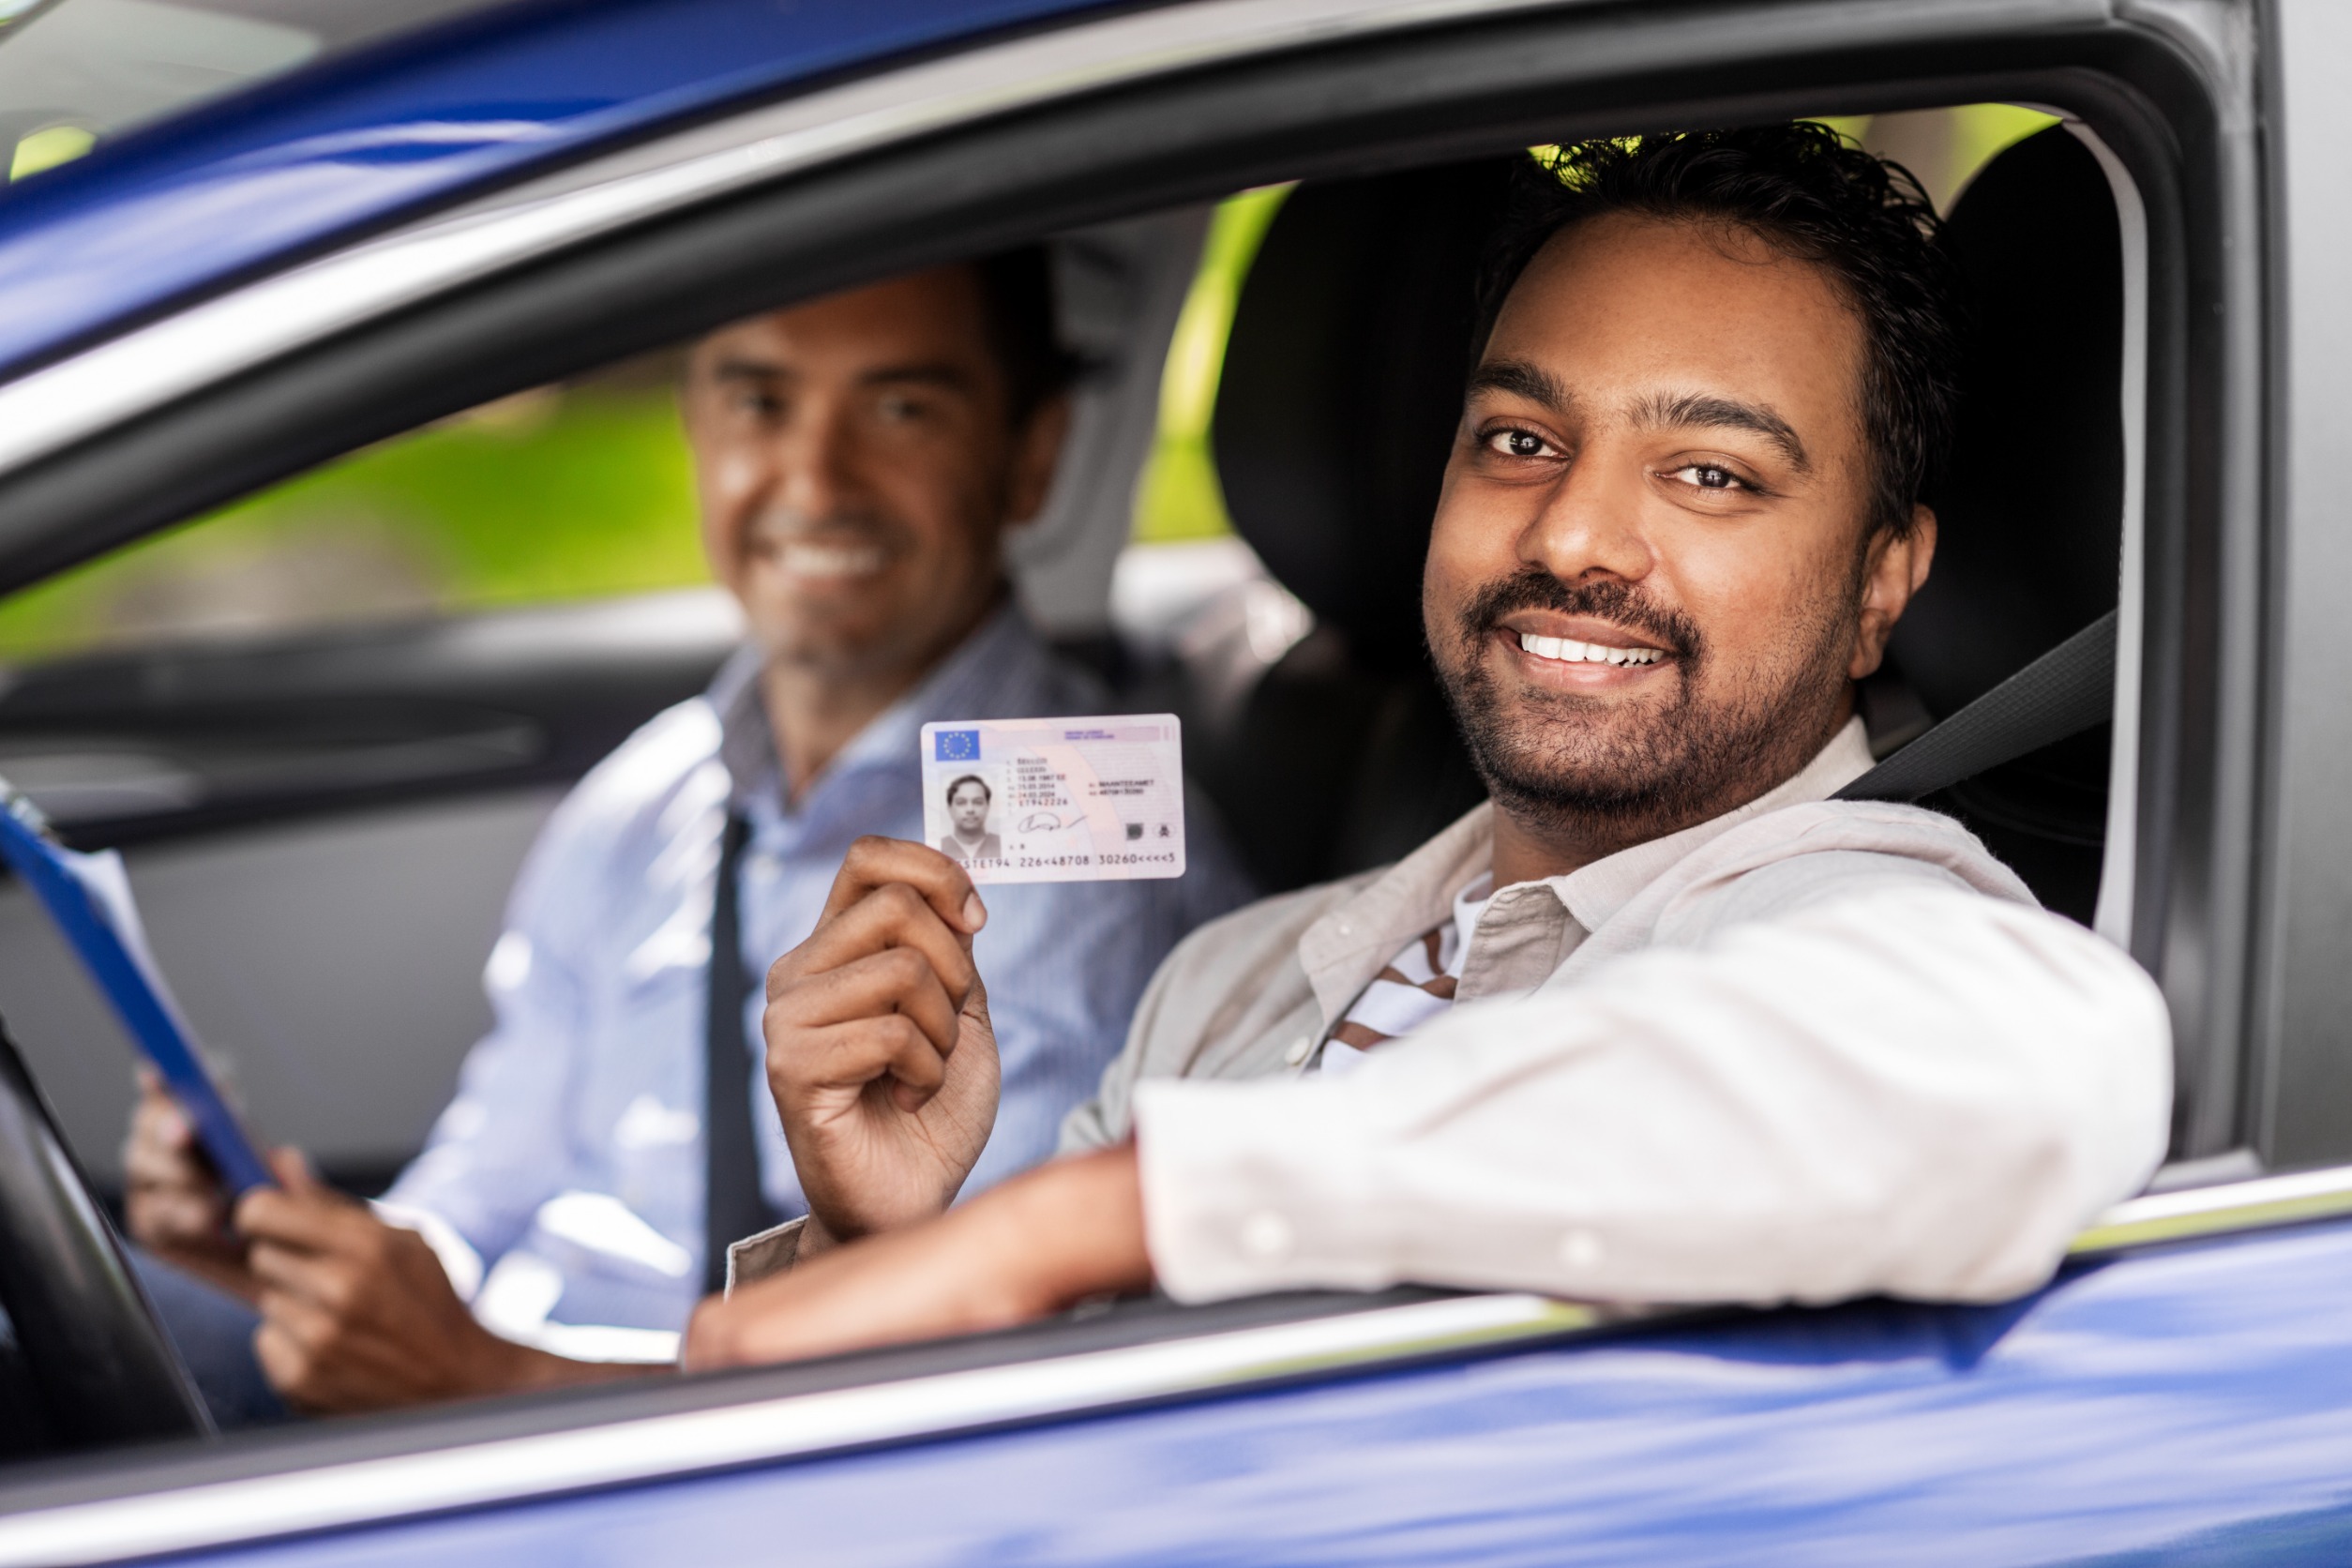 Maximize Veterans Benefits By Getting A Veterans Designation On Your Driver’s License